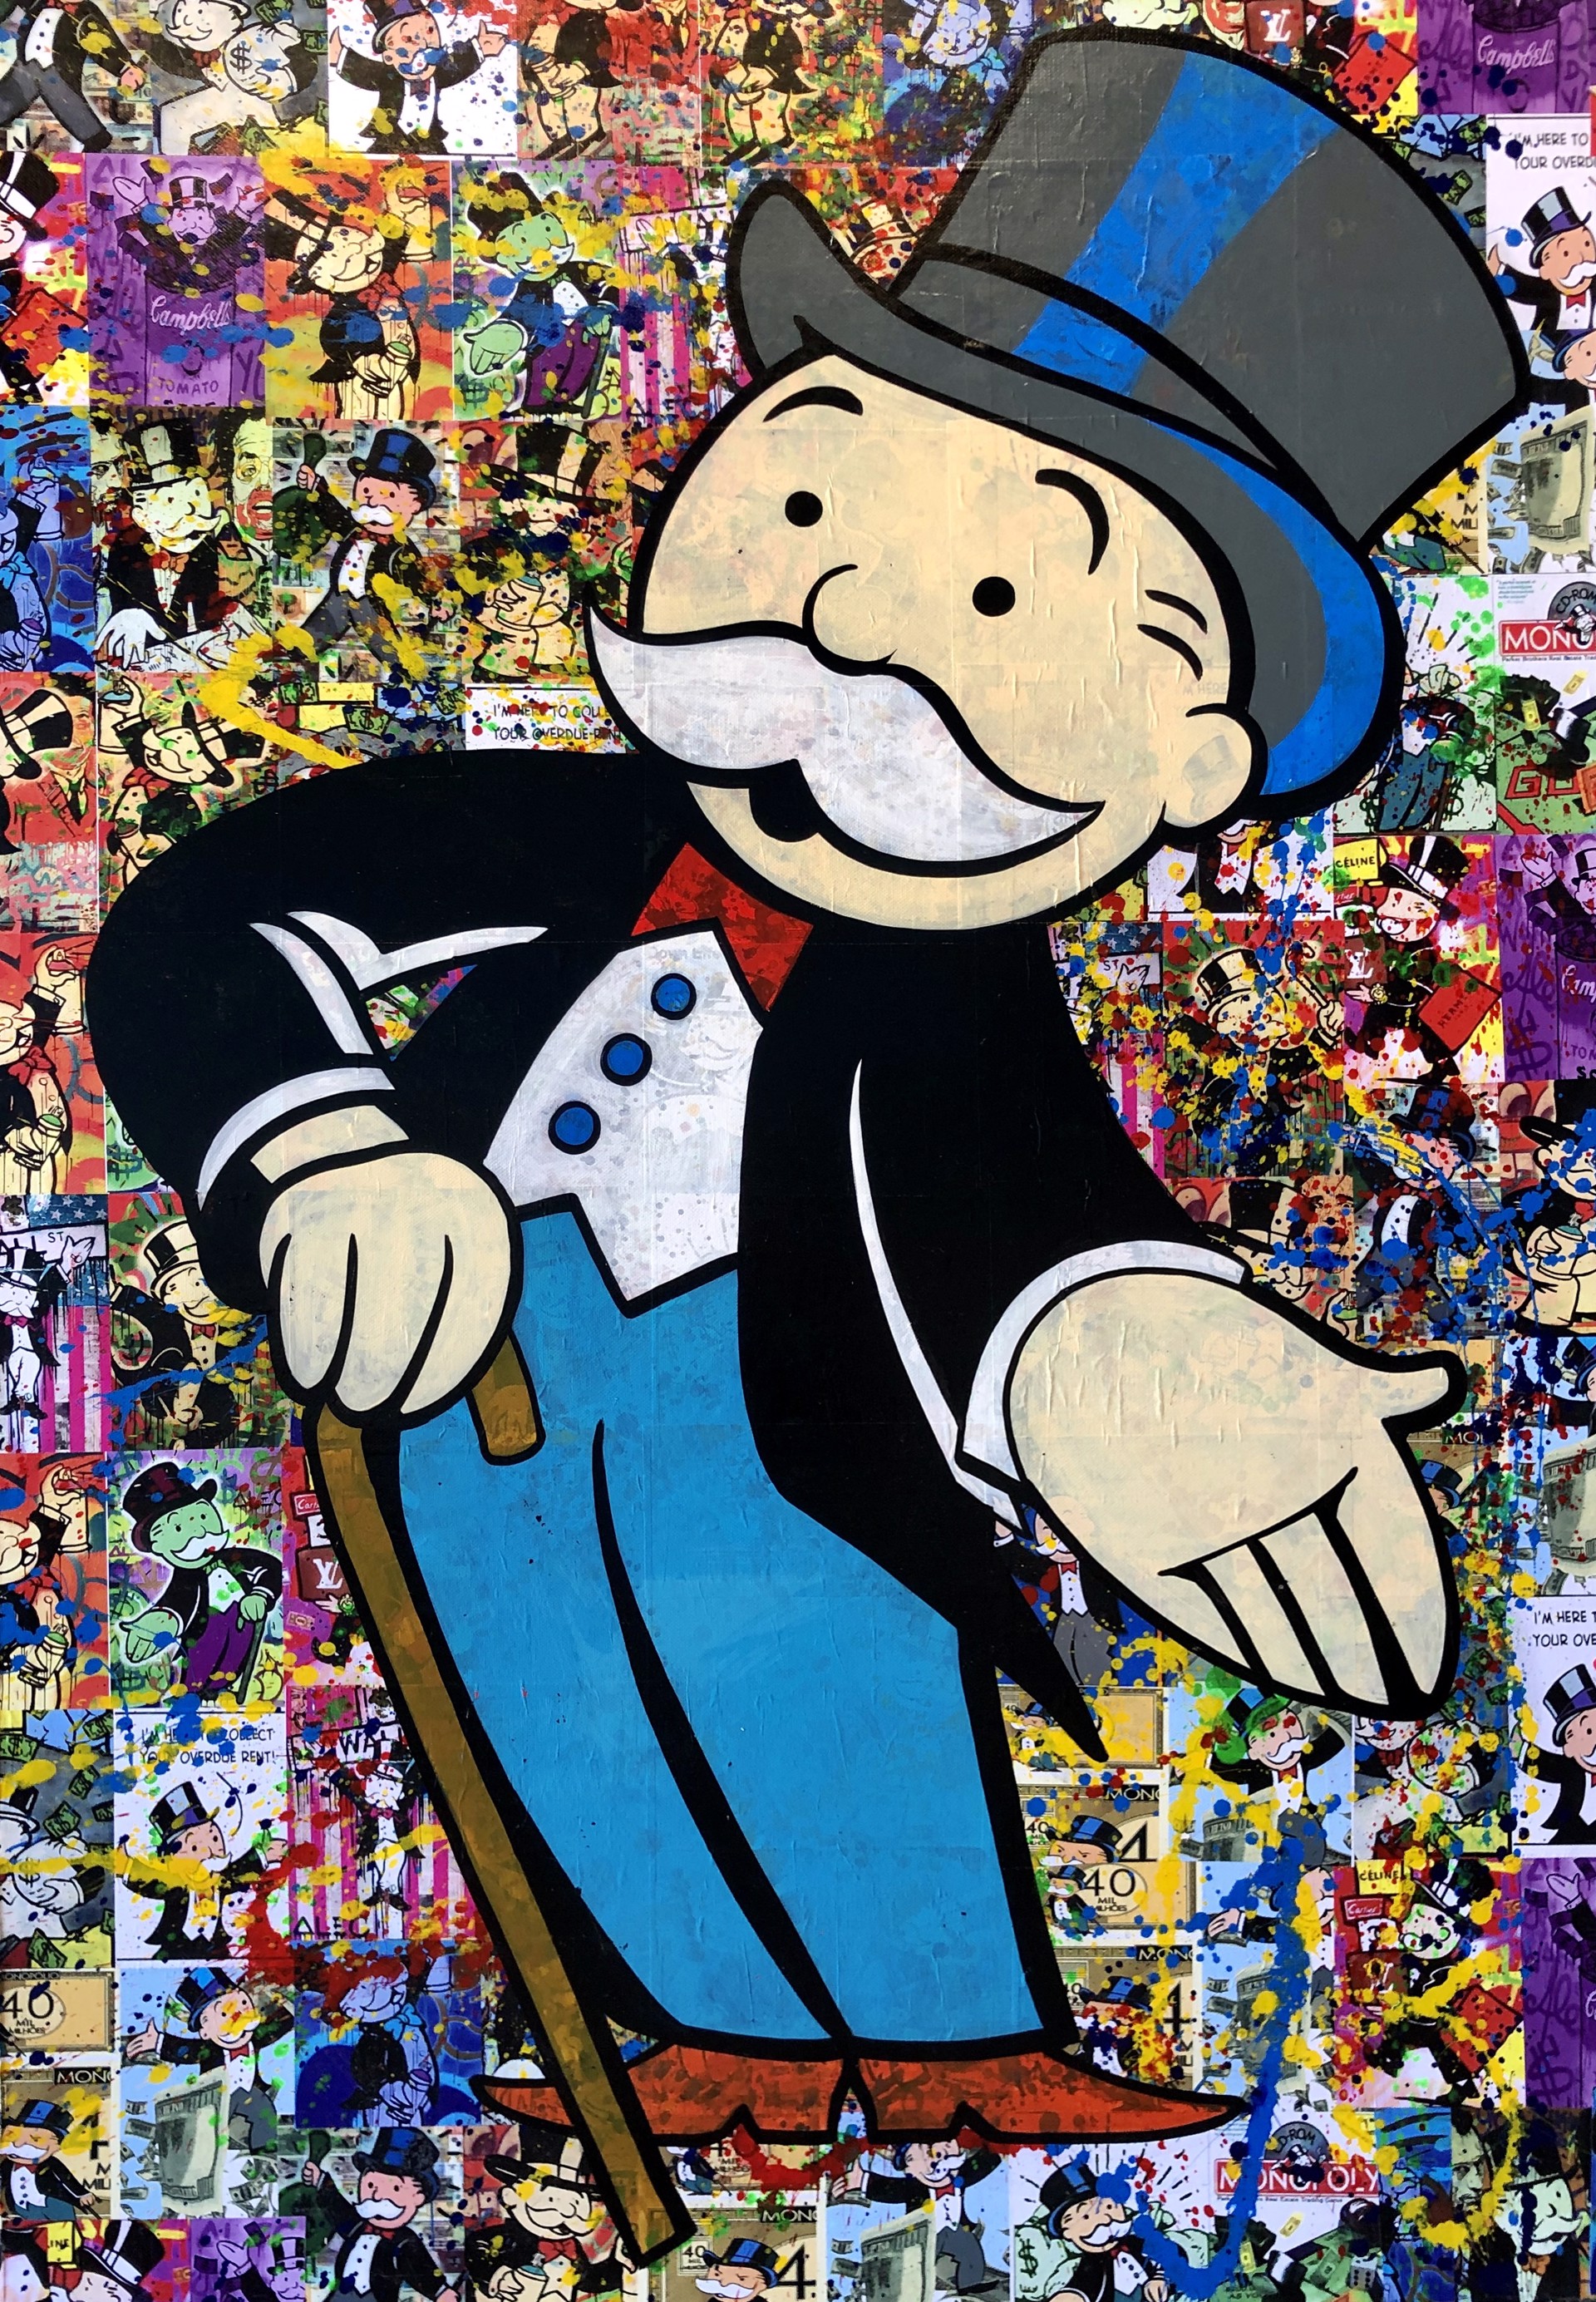 "Mr. Monopoly" by BuMa Project